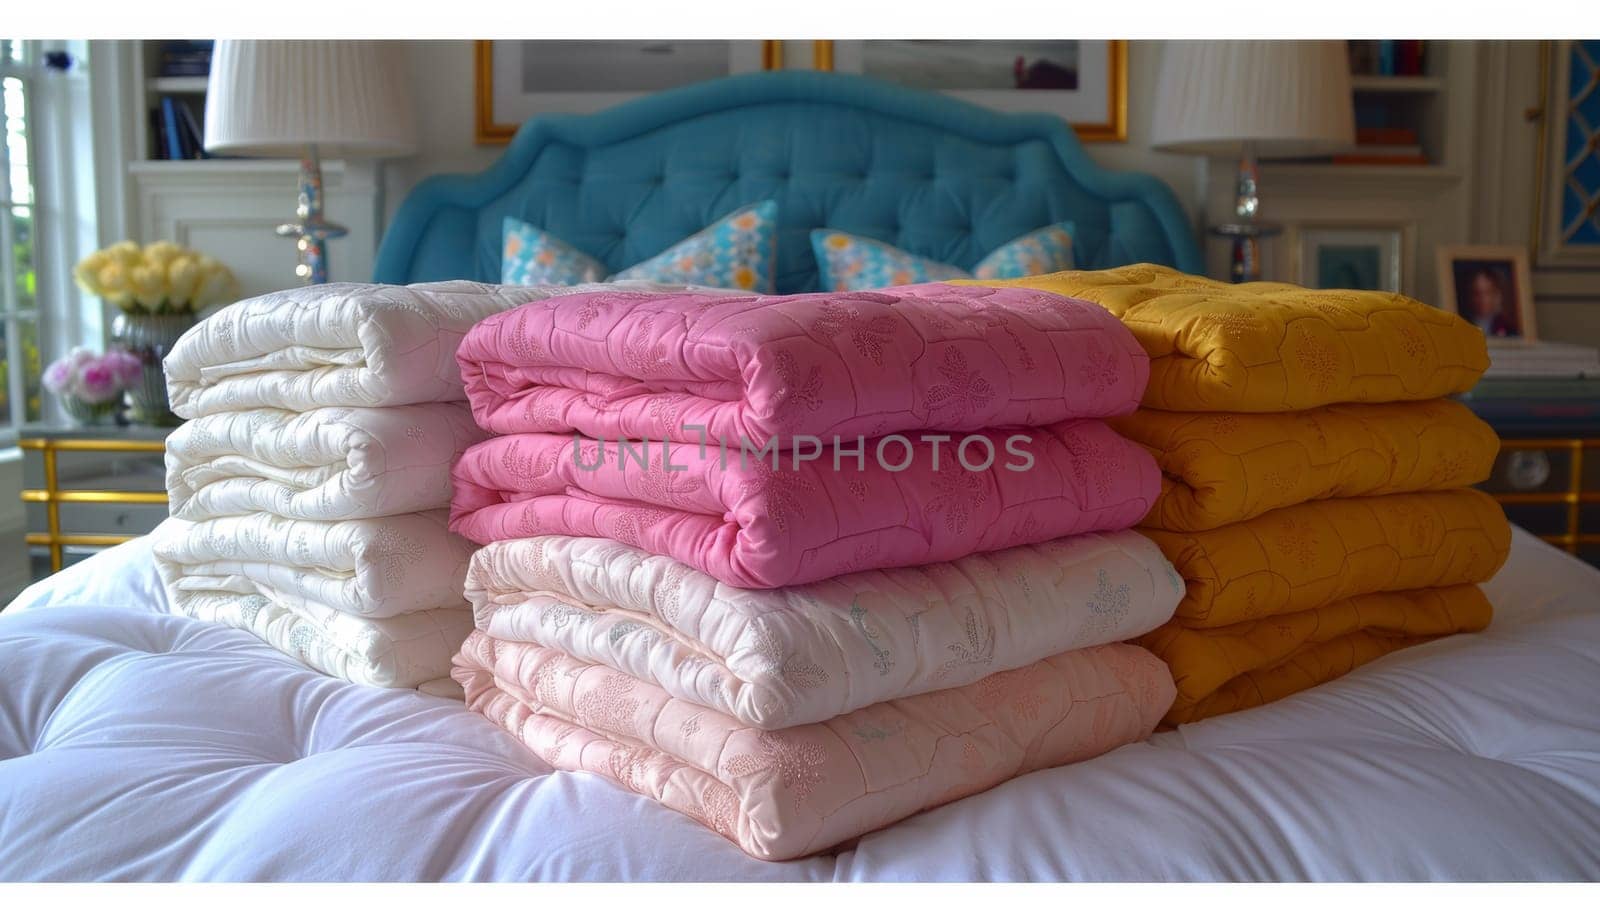 A stack of folded towels on a bed in front of blue and yellow pillows, AI by starush